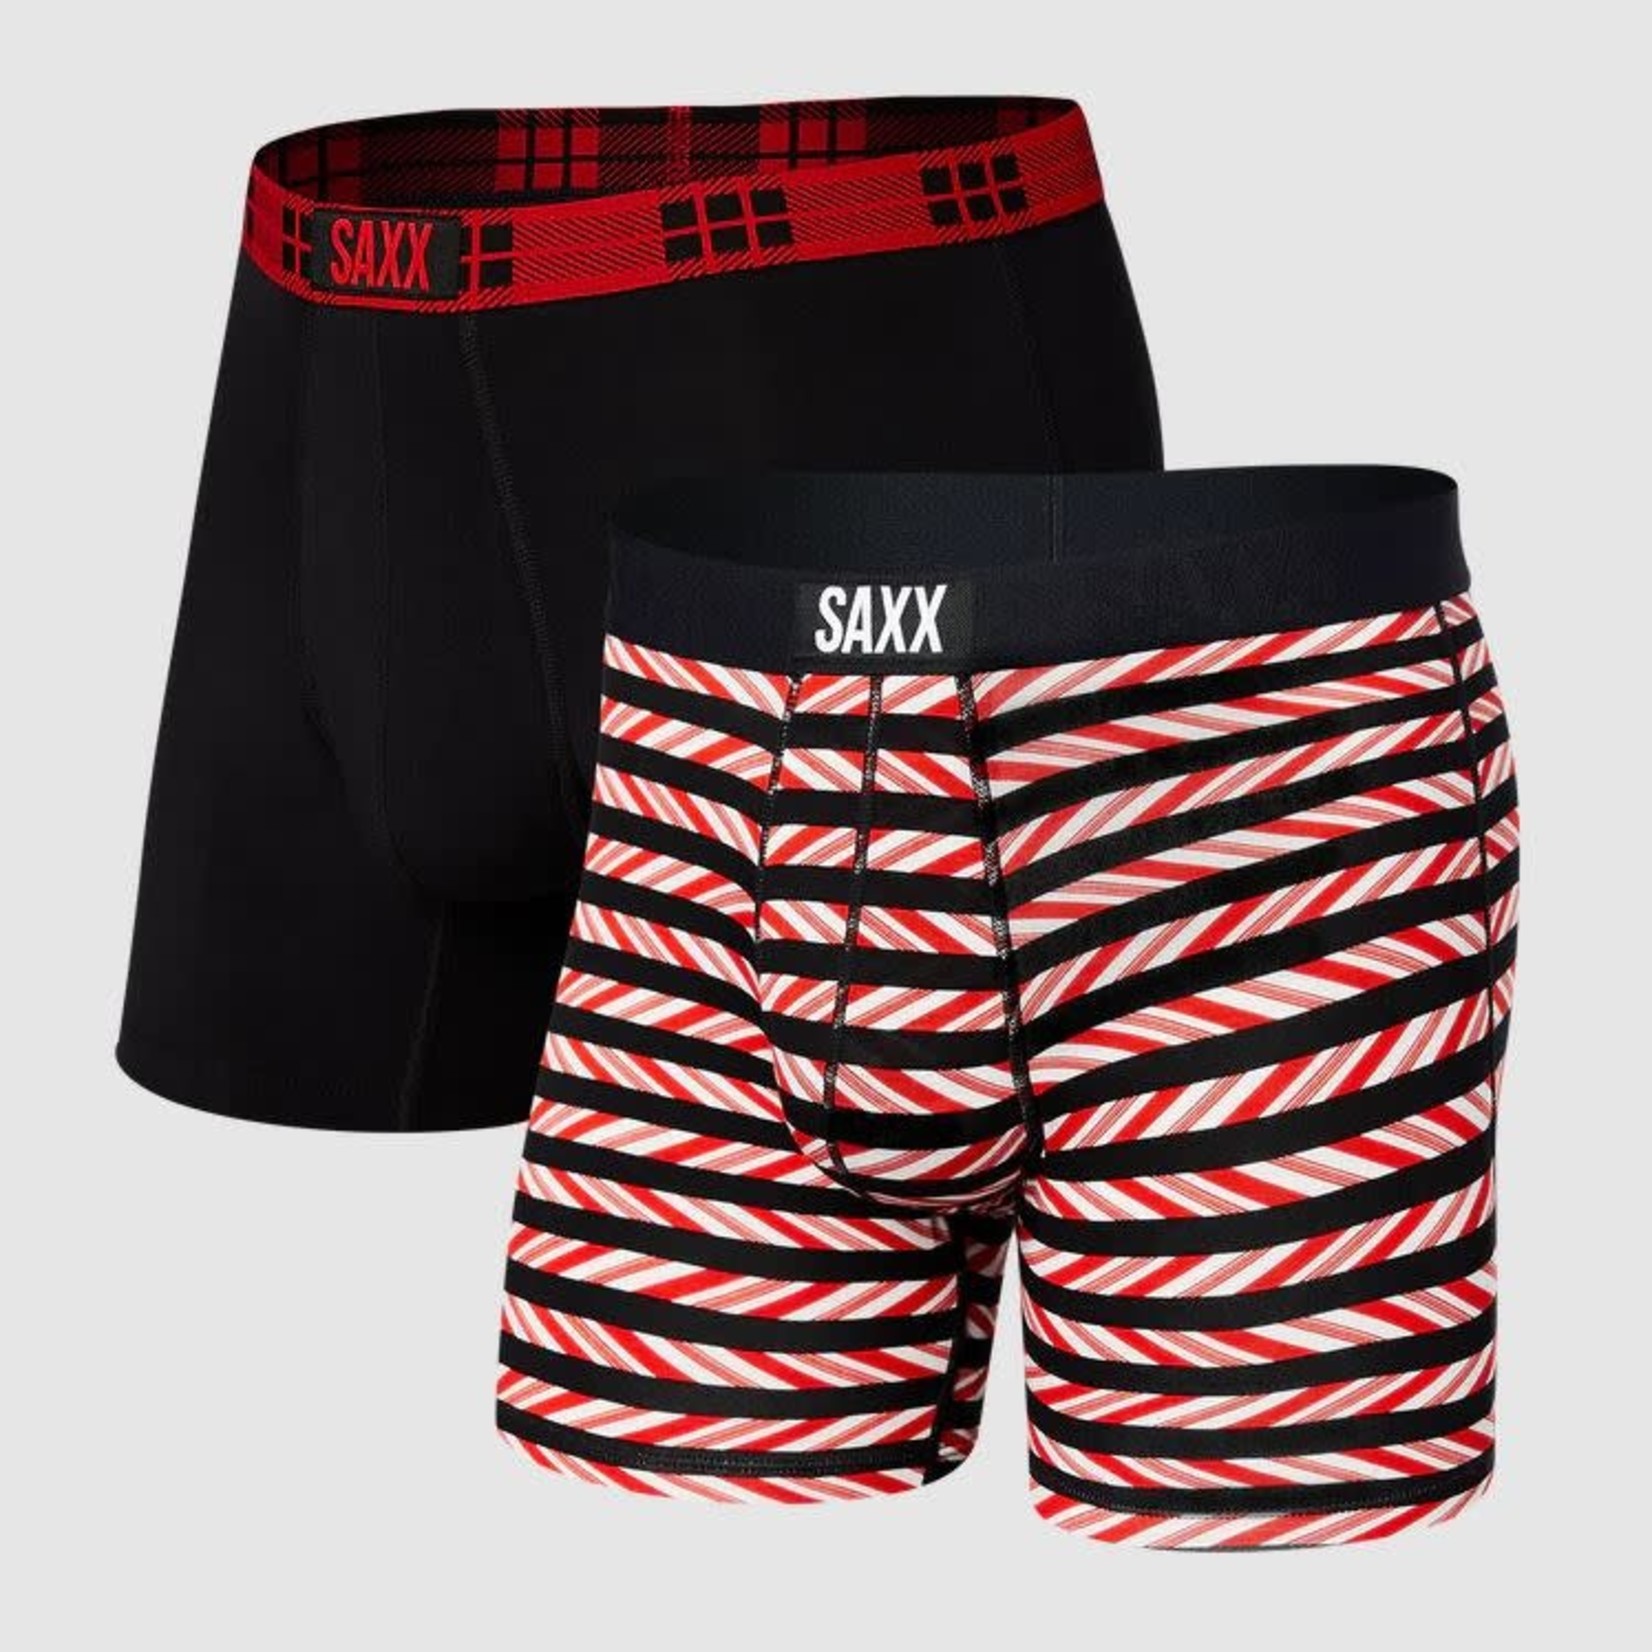 SAXX Vibe Boxer Brief 2 Pack Minty Fresh